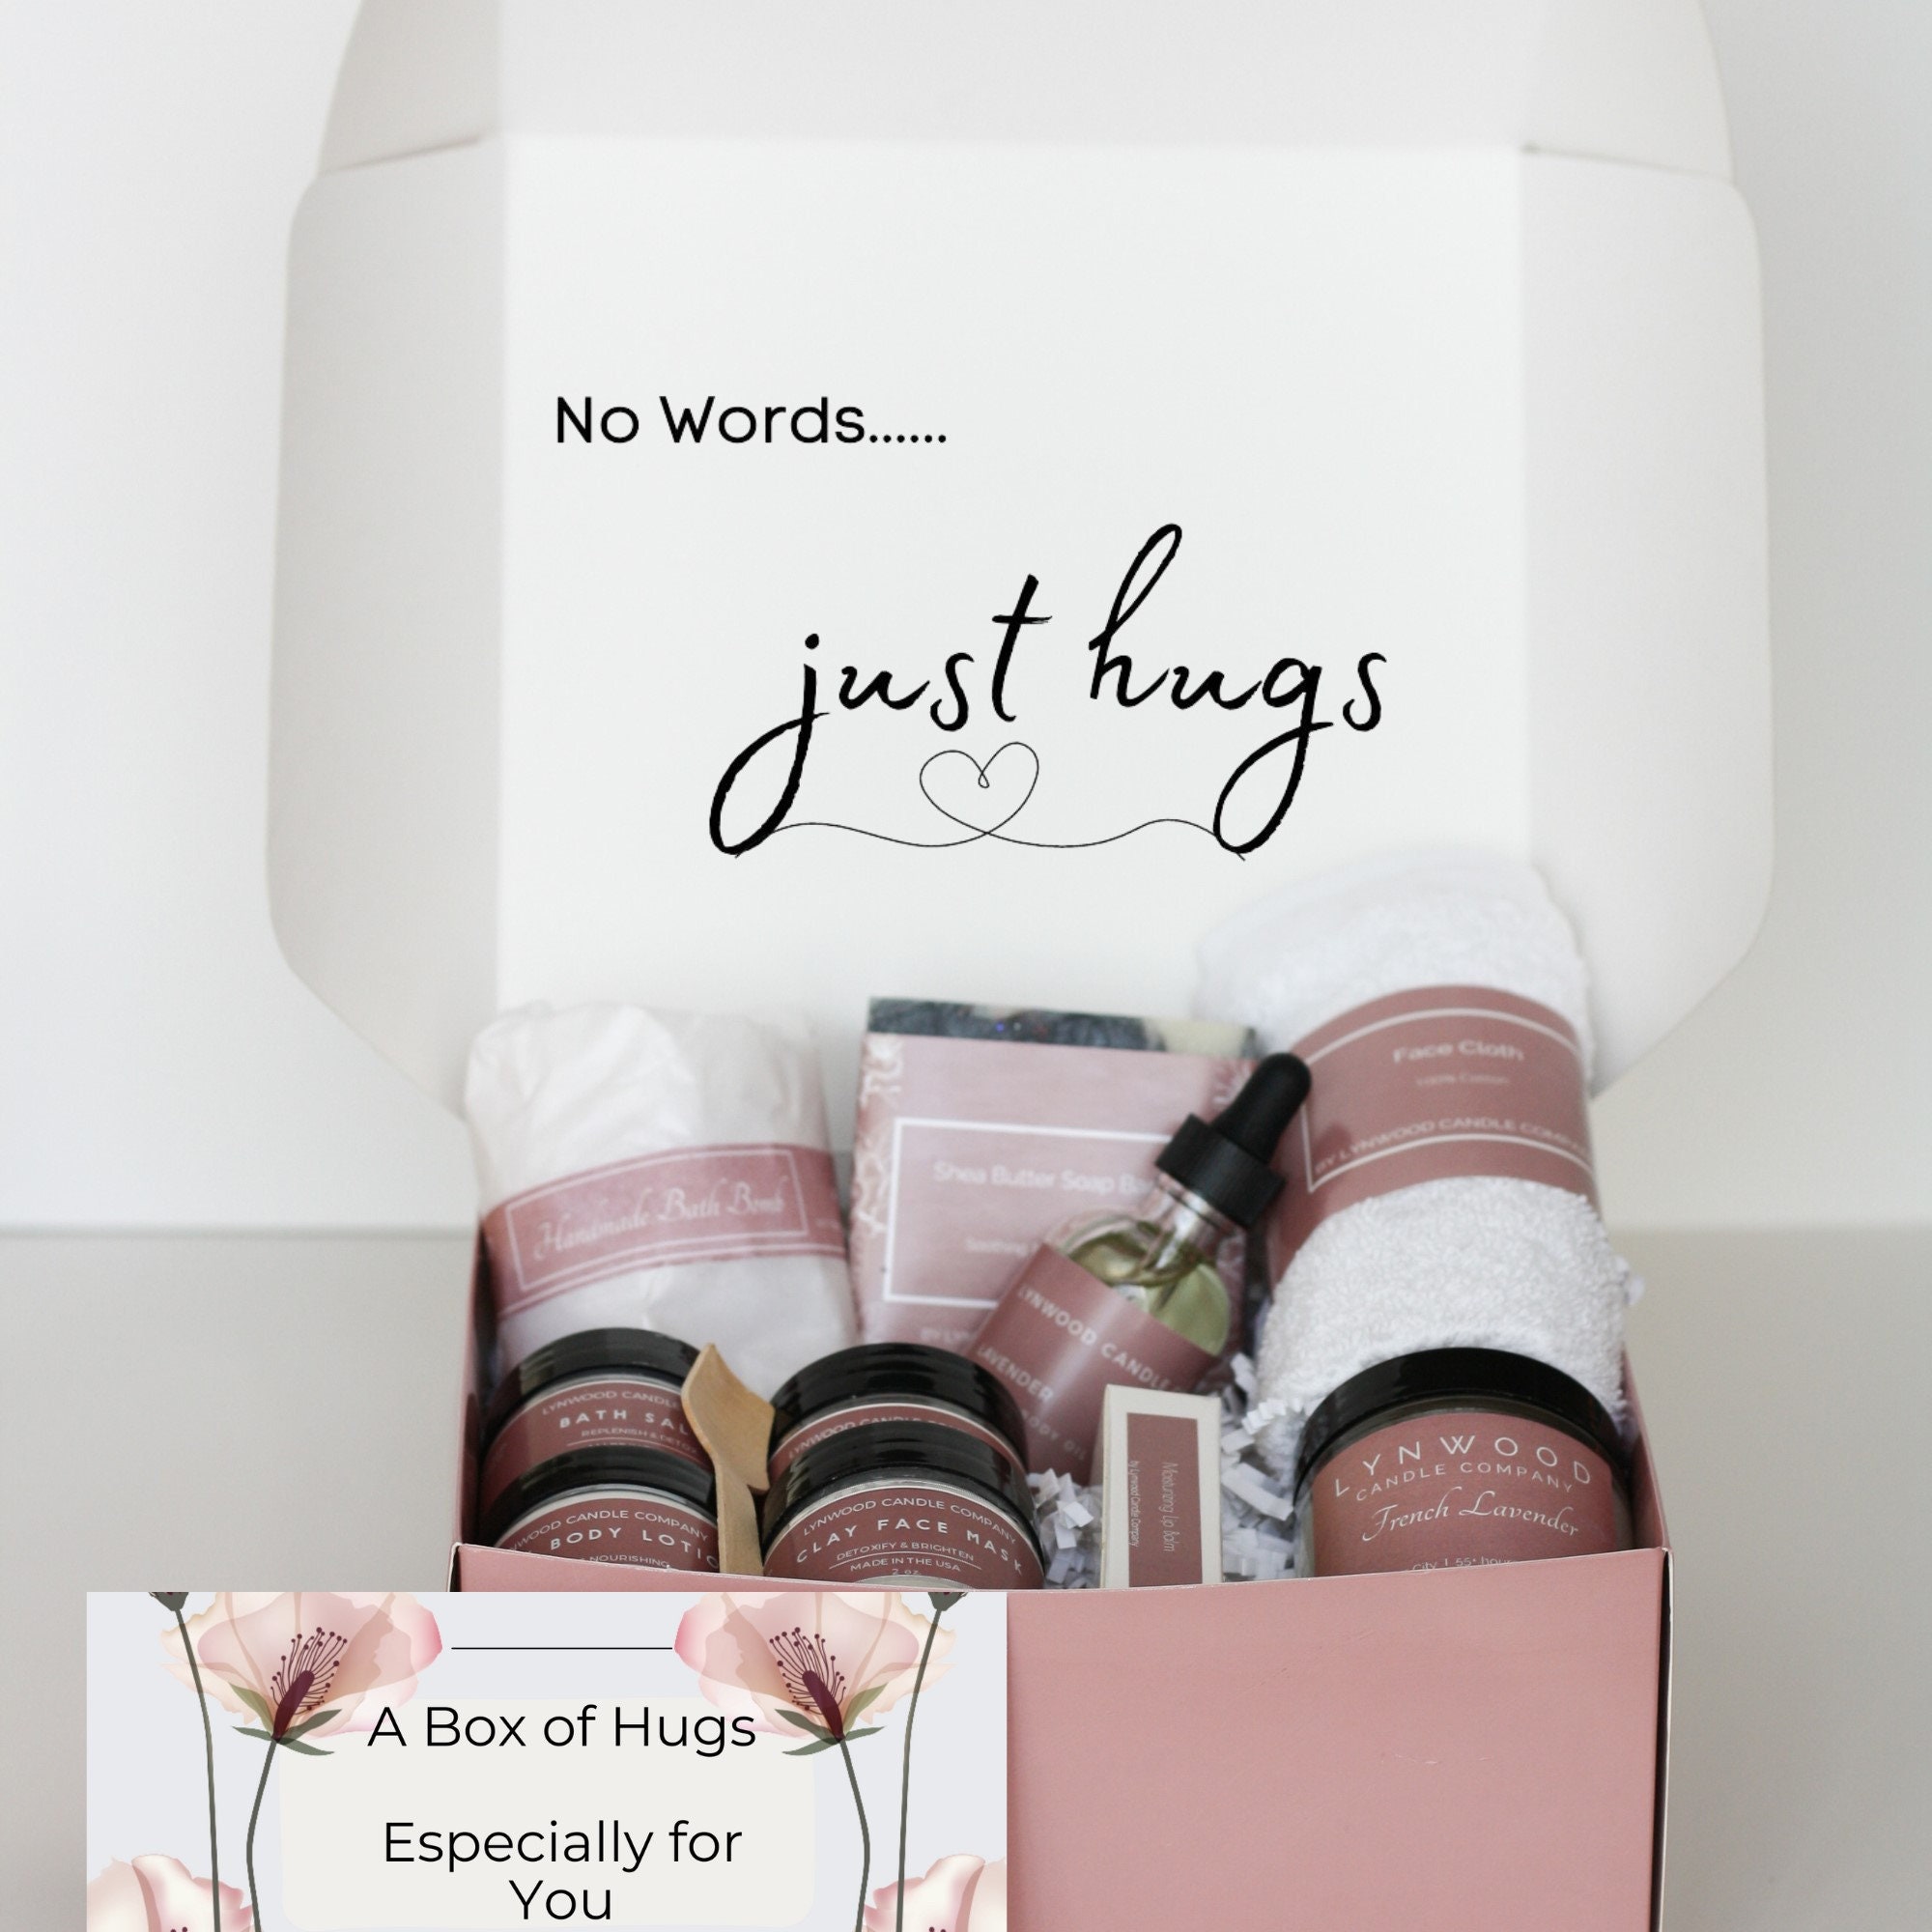 Comfort & Care Gift Basket - For those times when words are not